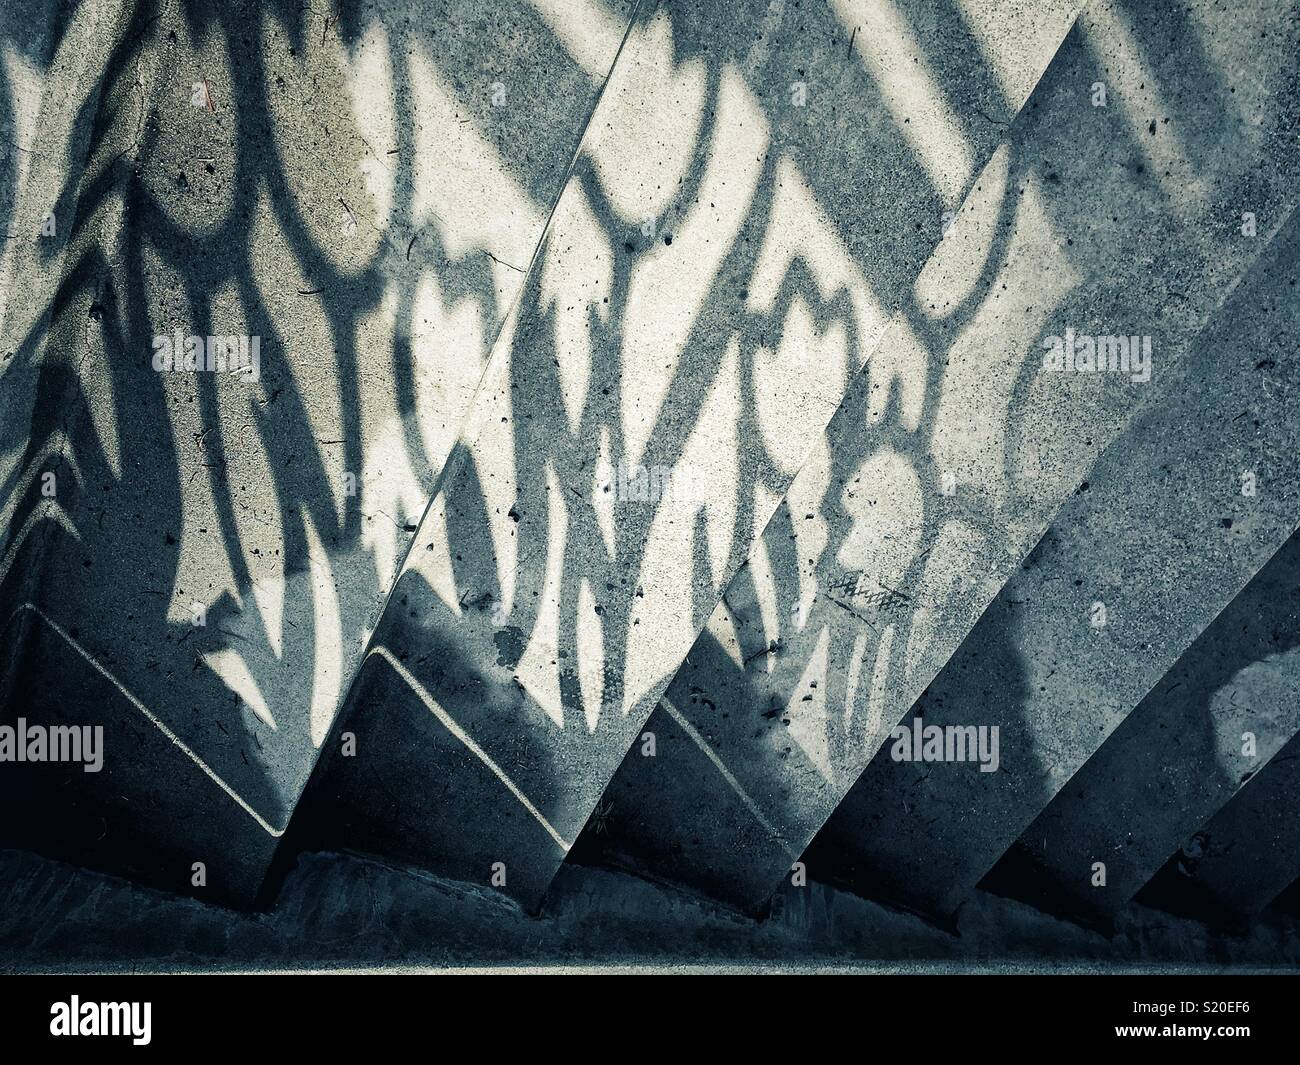 Tulip shaped railing casts shadows on the stairs of Duncan garden in Manito Park in Spokane WA Stock Photo